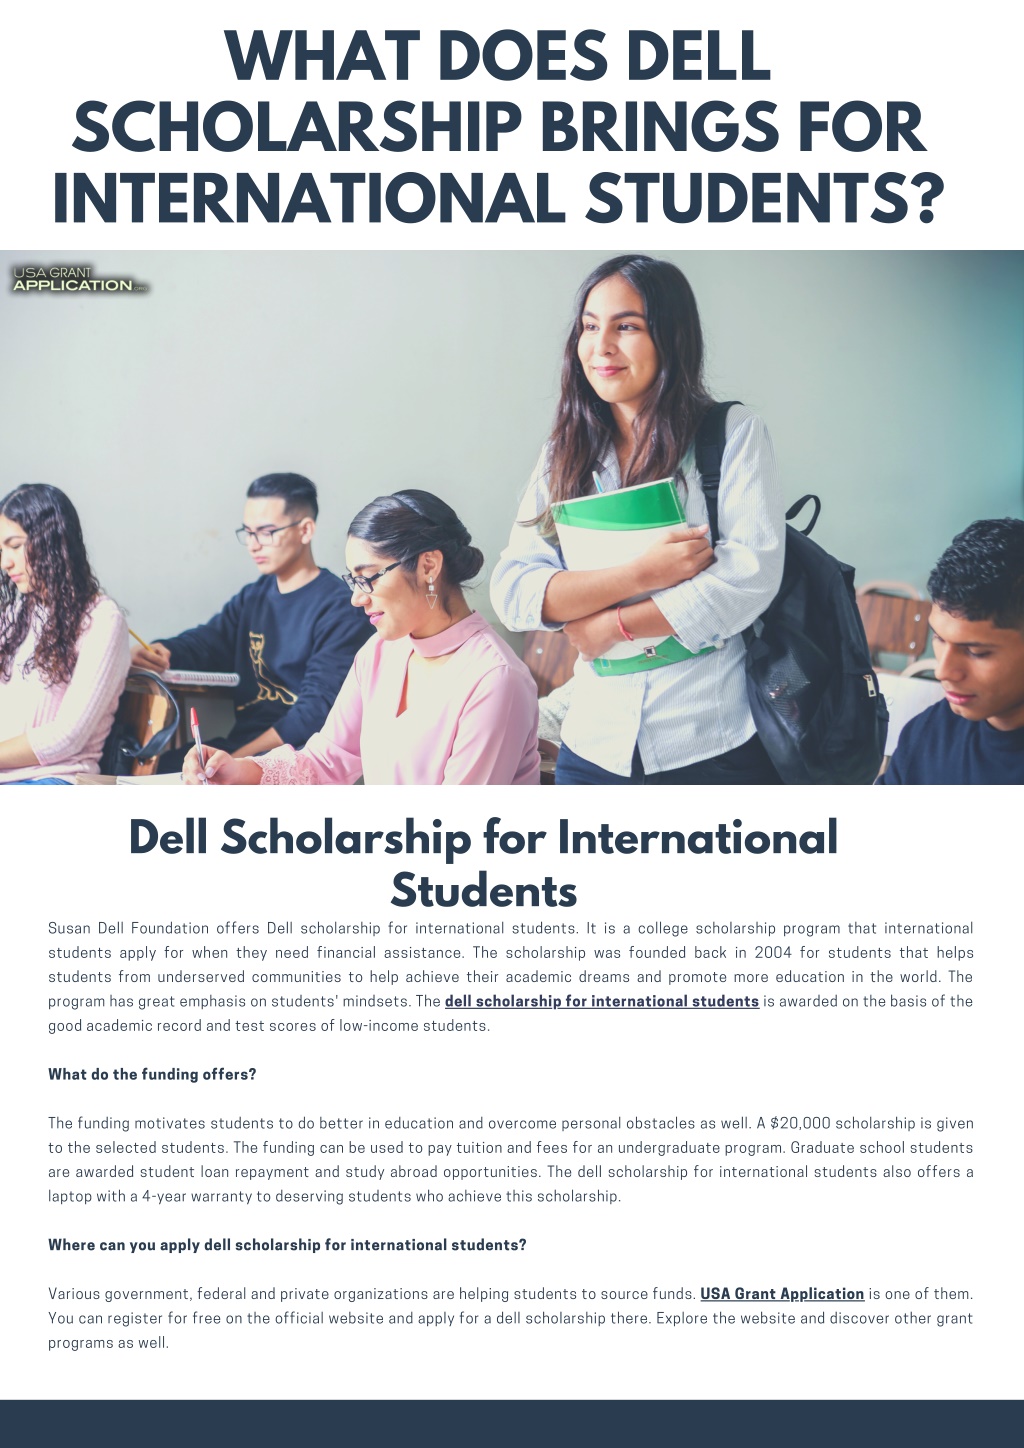 PPT What Does Dell Scholarship Brings for International Students